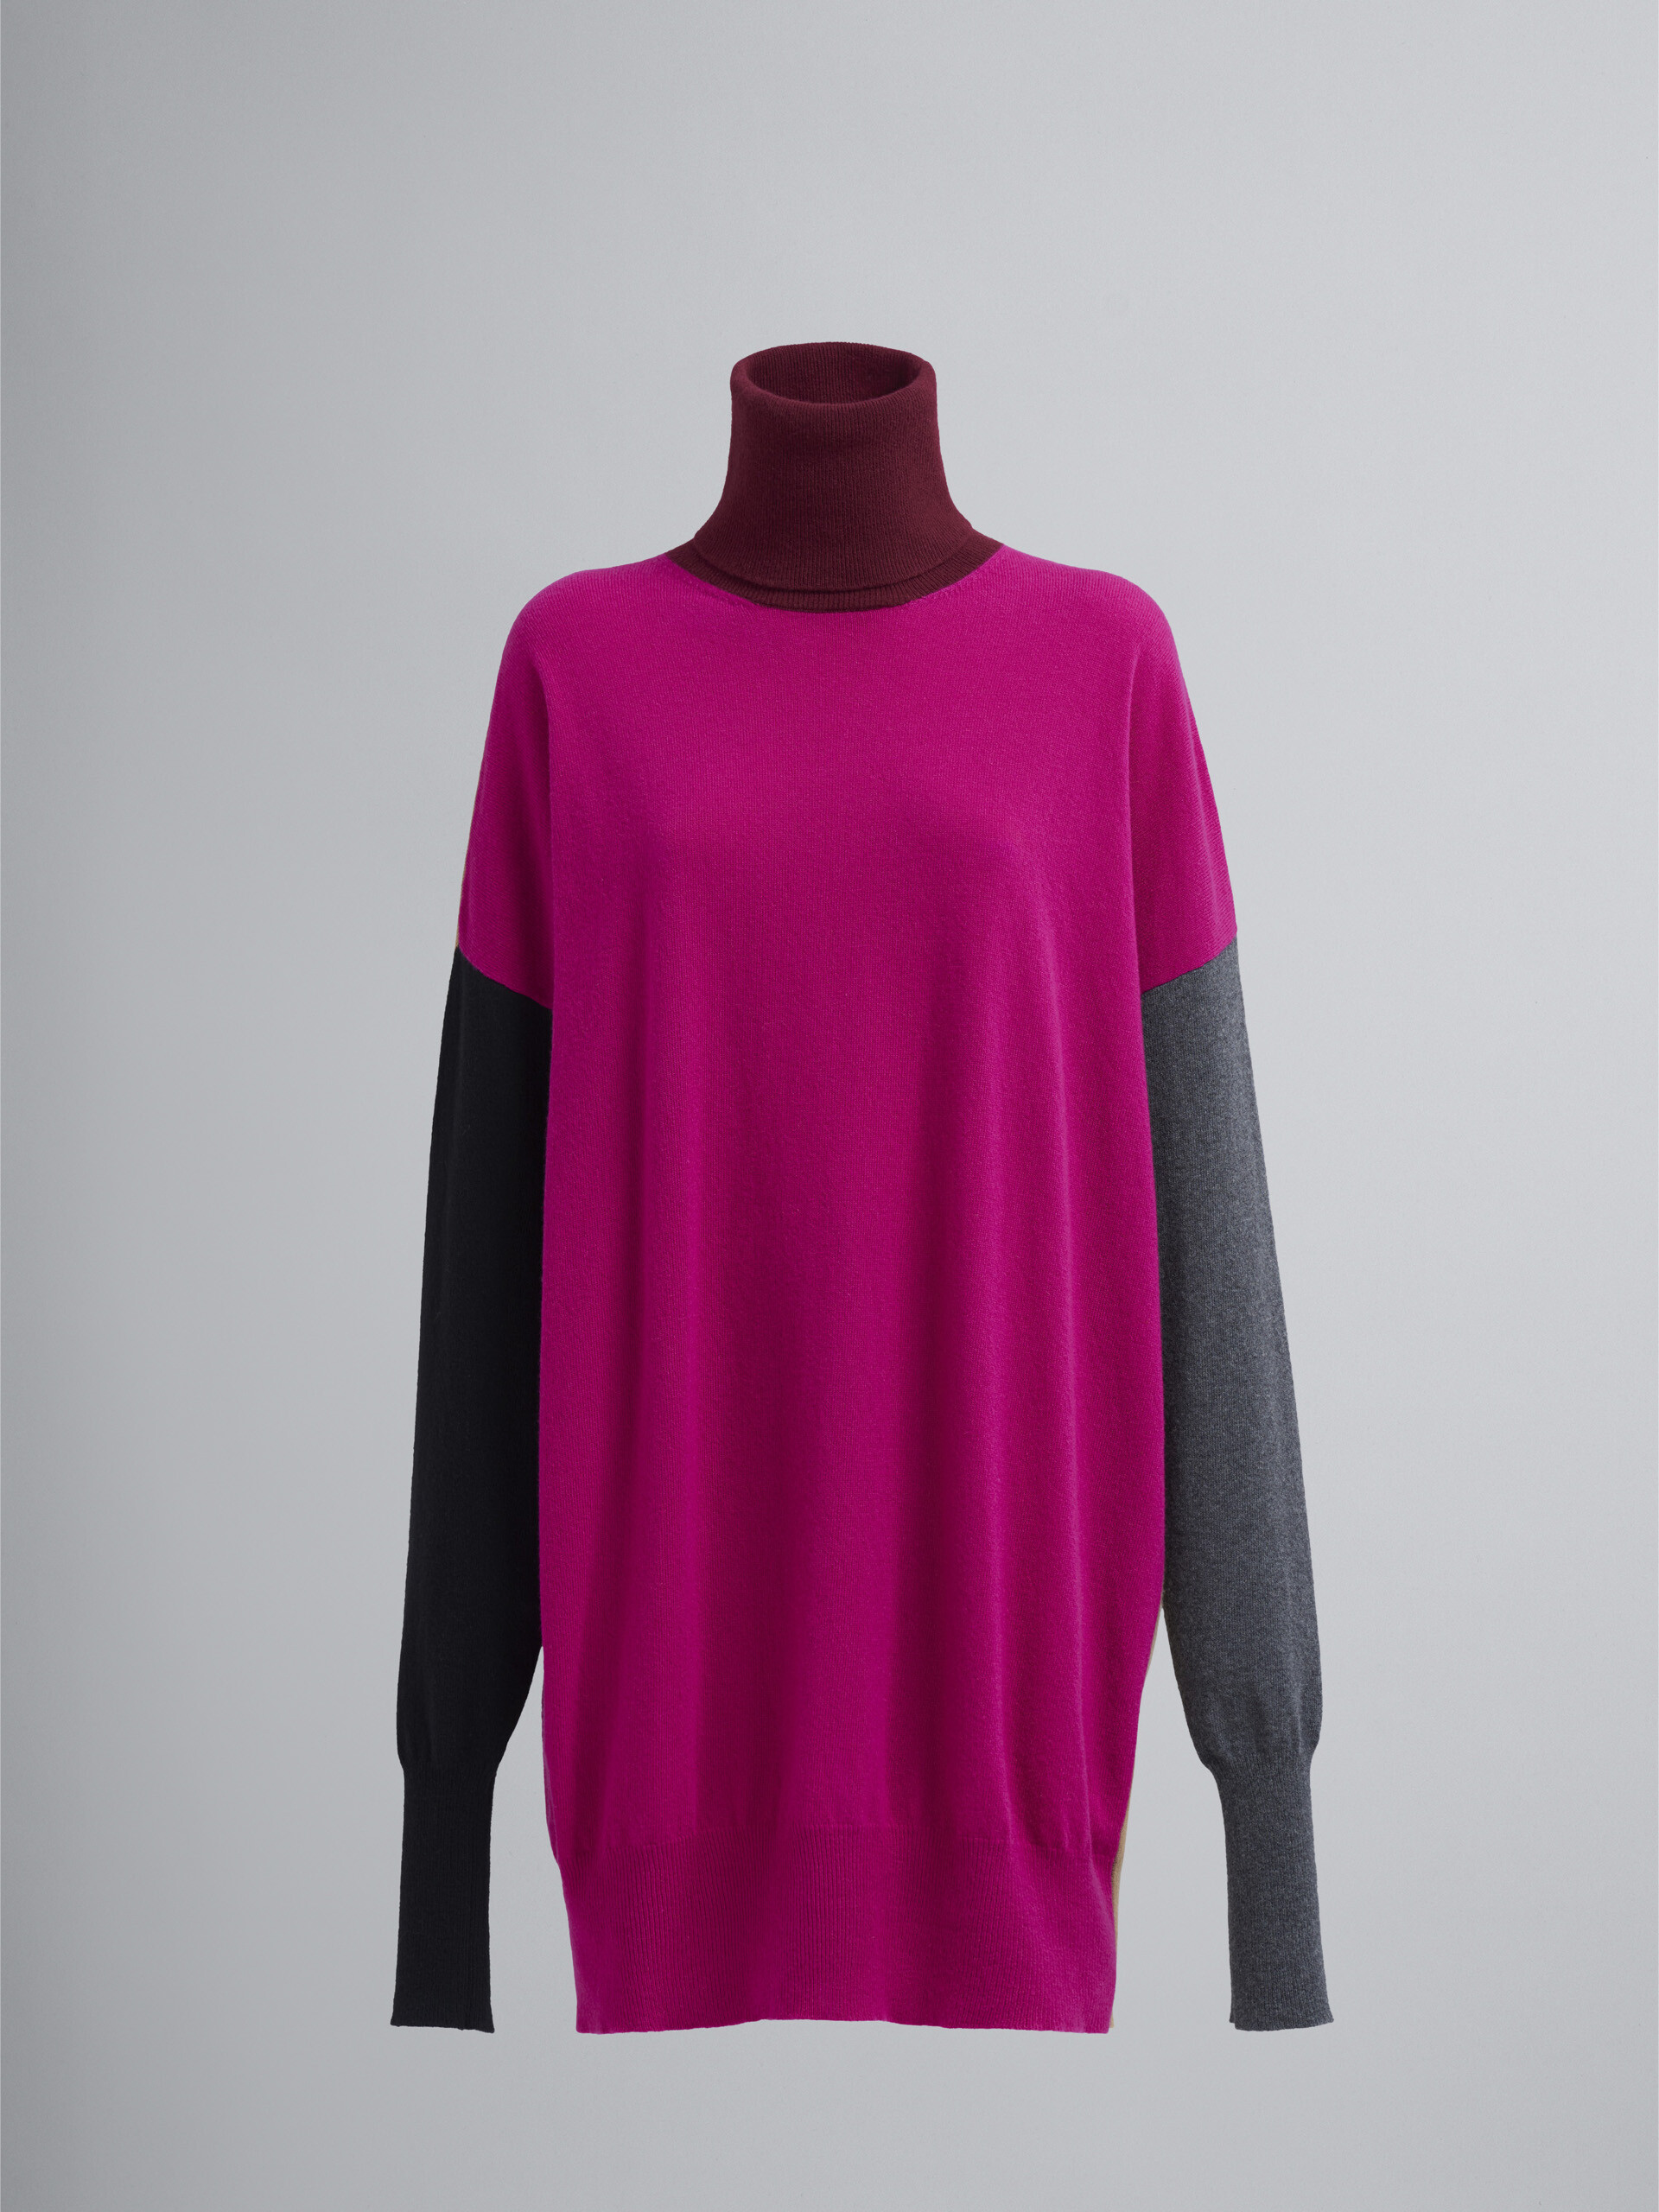 Colourblock wool and cashmere sweater - Pullovers - Image 1